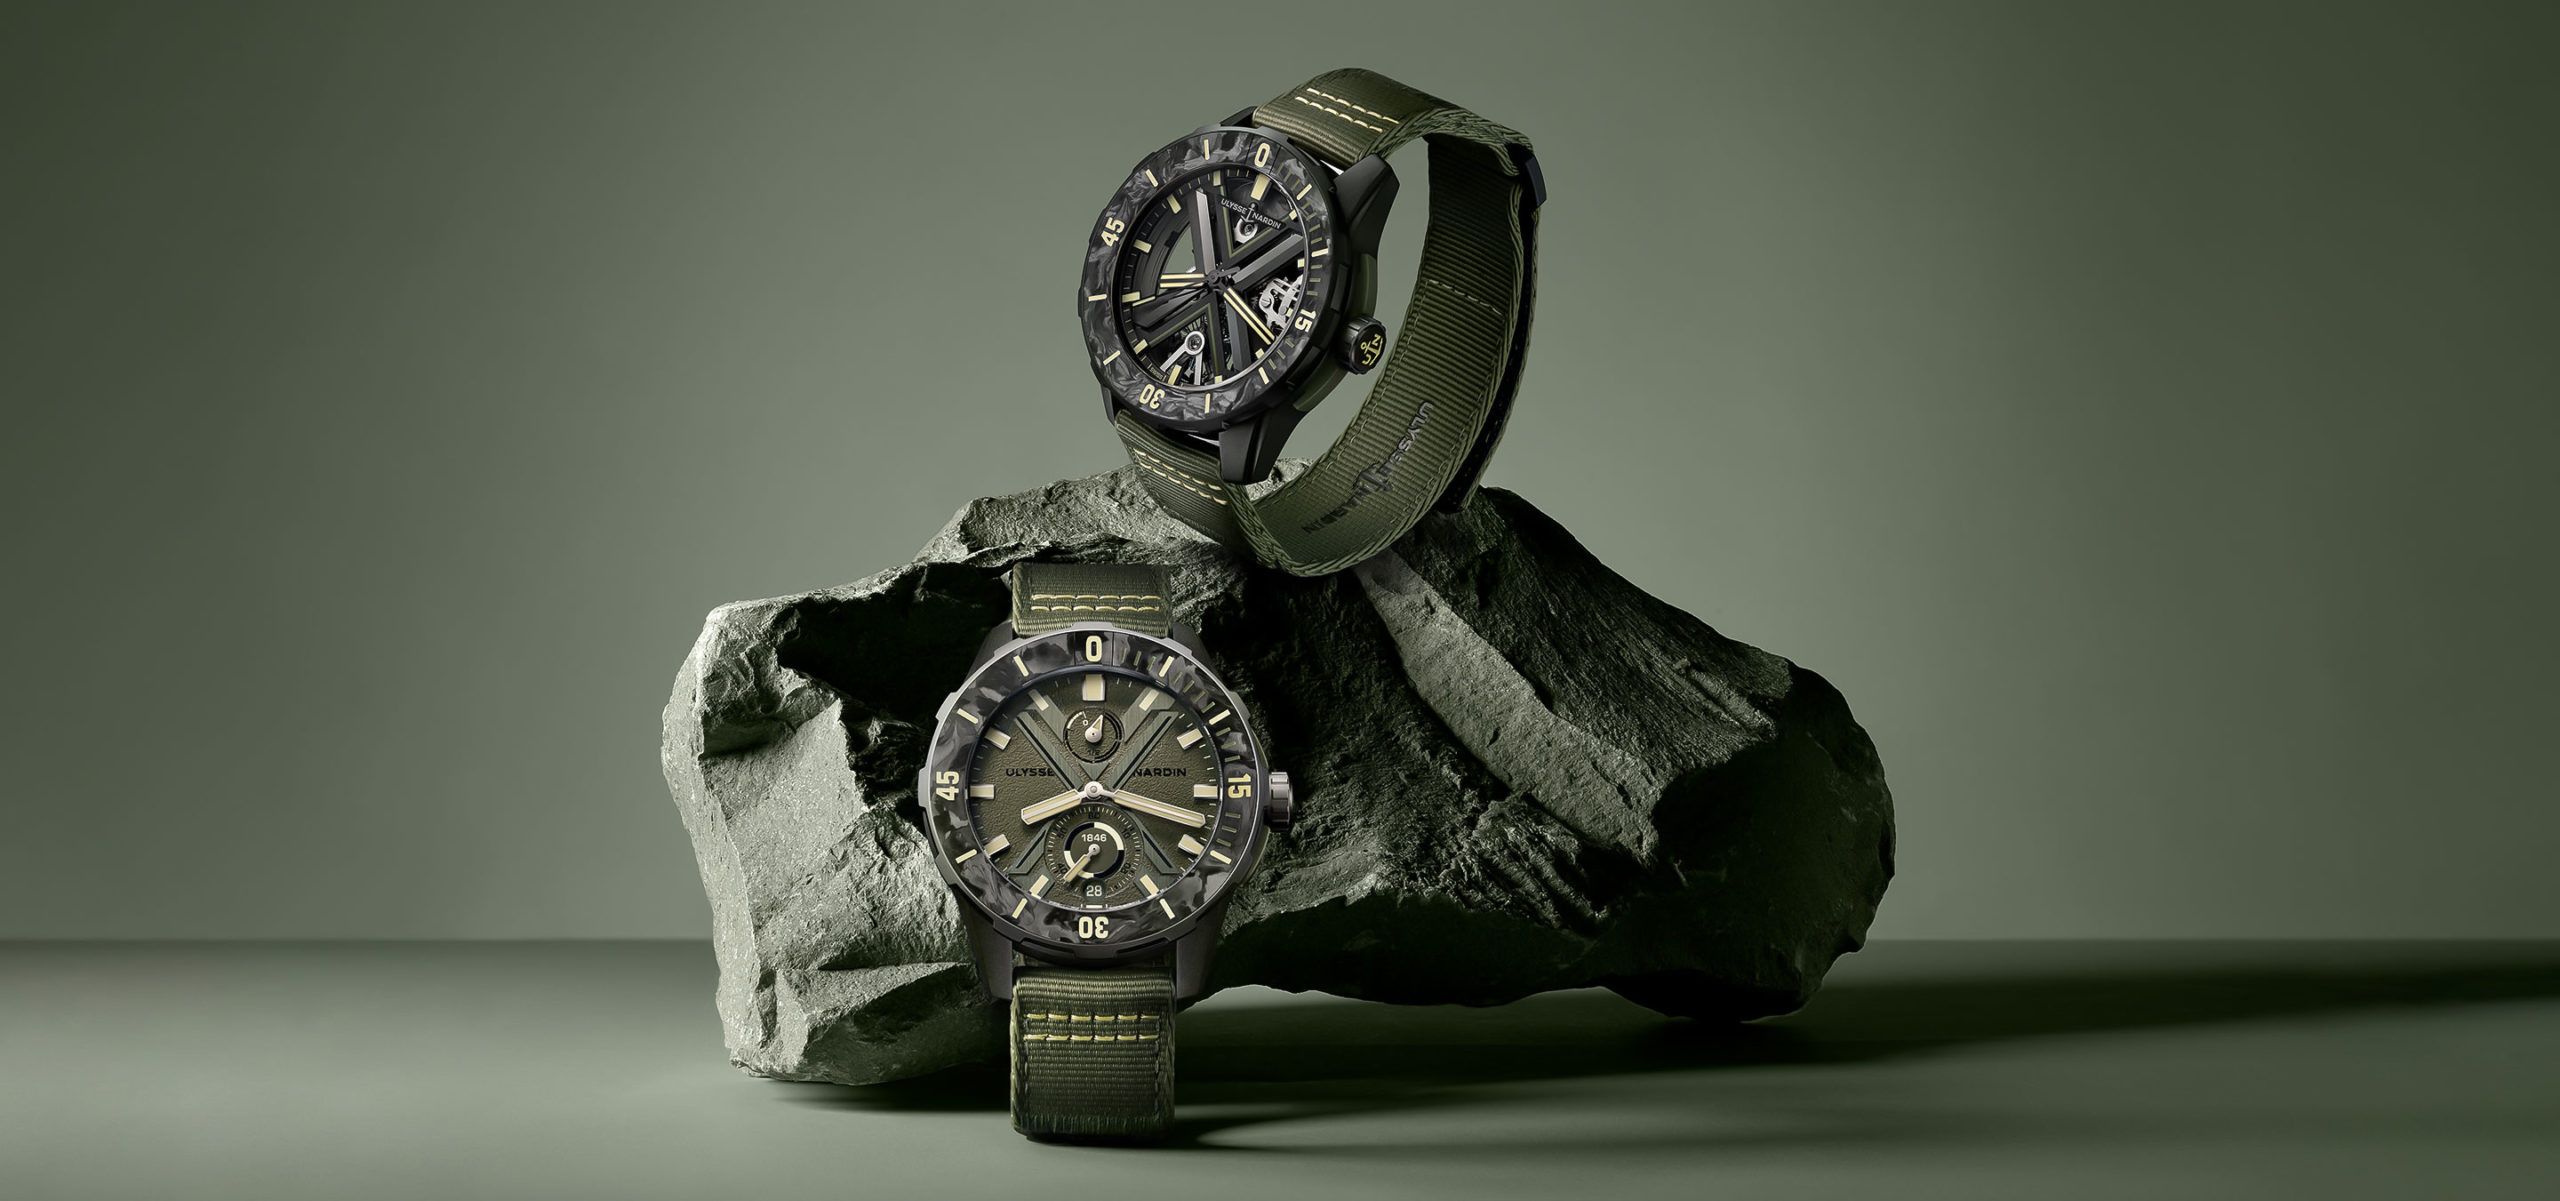 Ulysse Nardin Deploy The Adventure-Ready Diver Net OPS And Diver X Skeleton OPS Timepieces In Their Mission Towards Sustainability